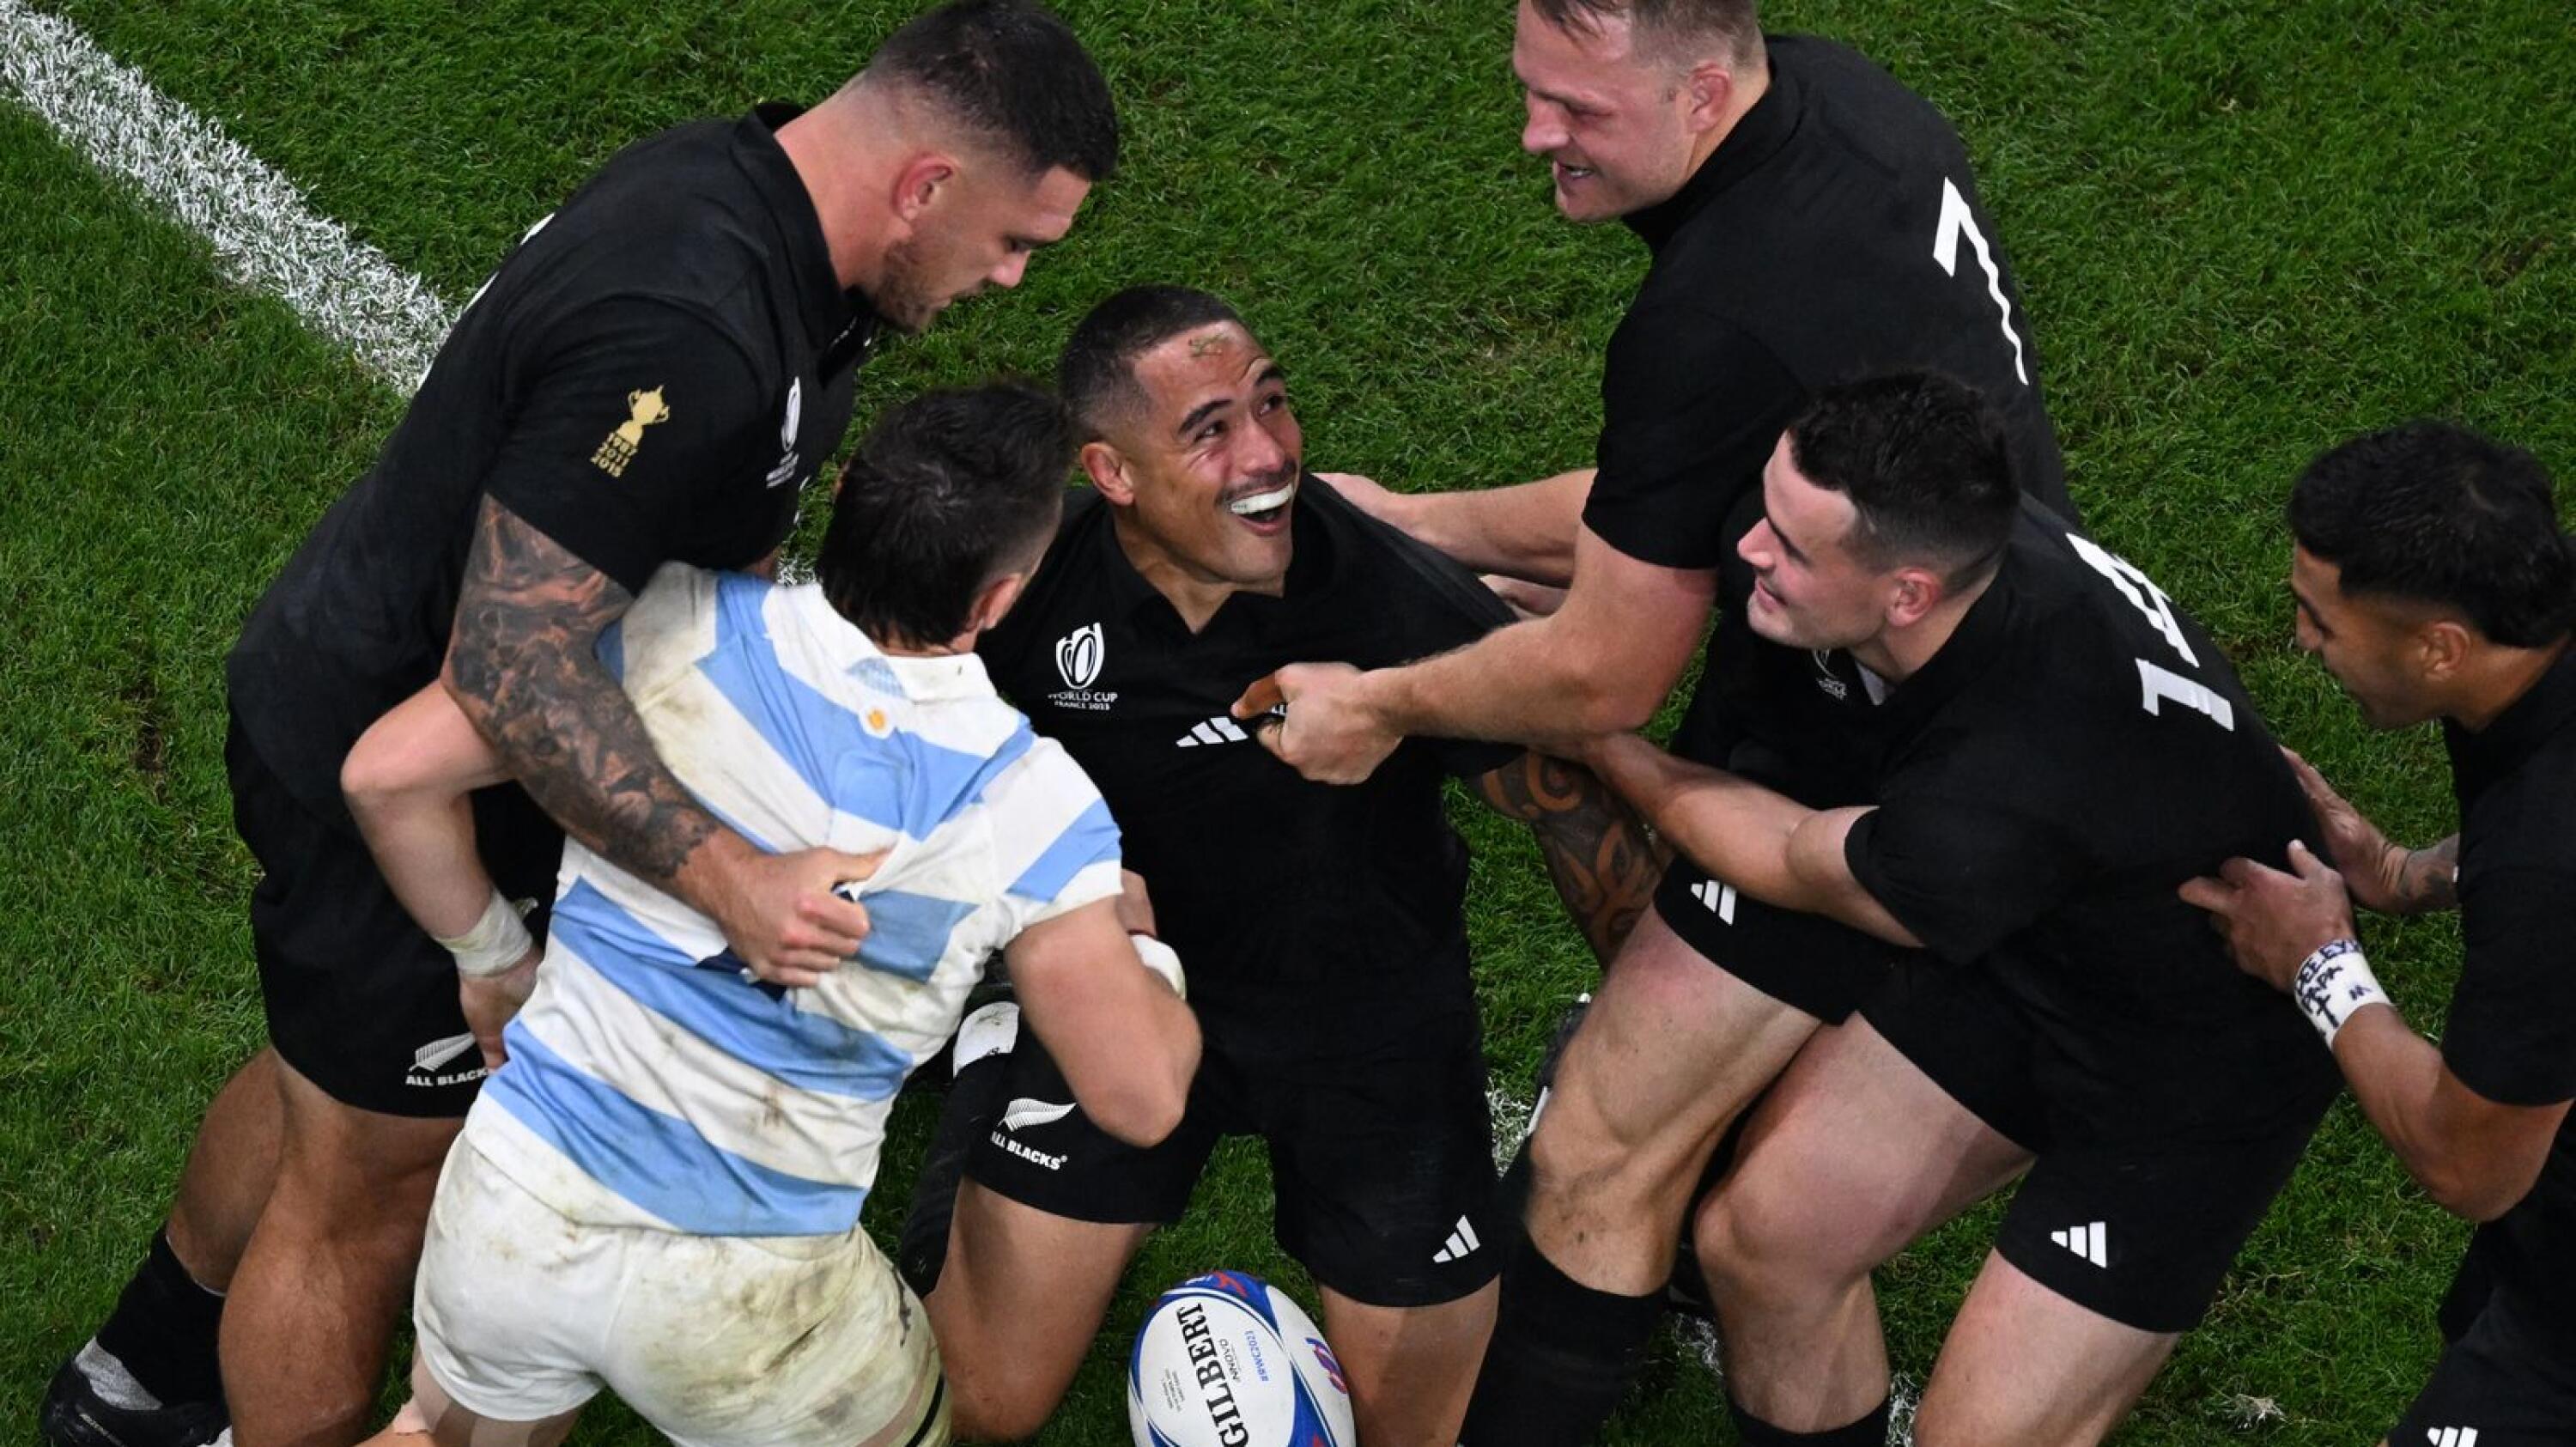 New Zealand scrumhalf Aaron Smith celebrates with teammates after scoring a try during their Rugby World Cup semi-final against Argentina at the Stade de France in Saint-Denis on Friday